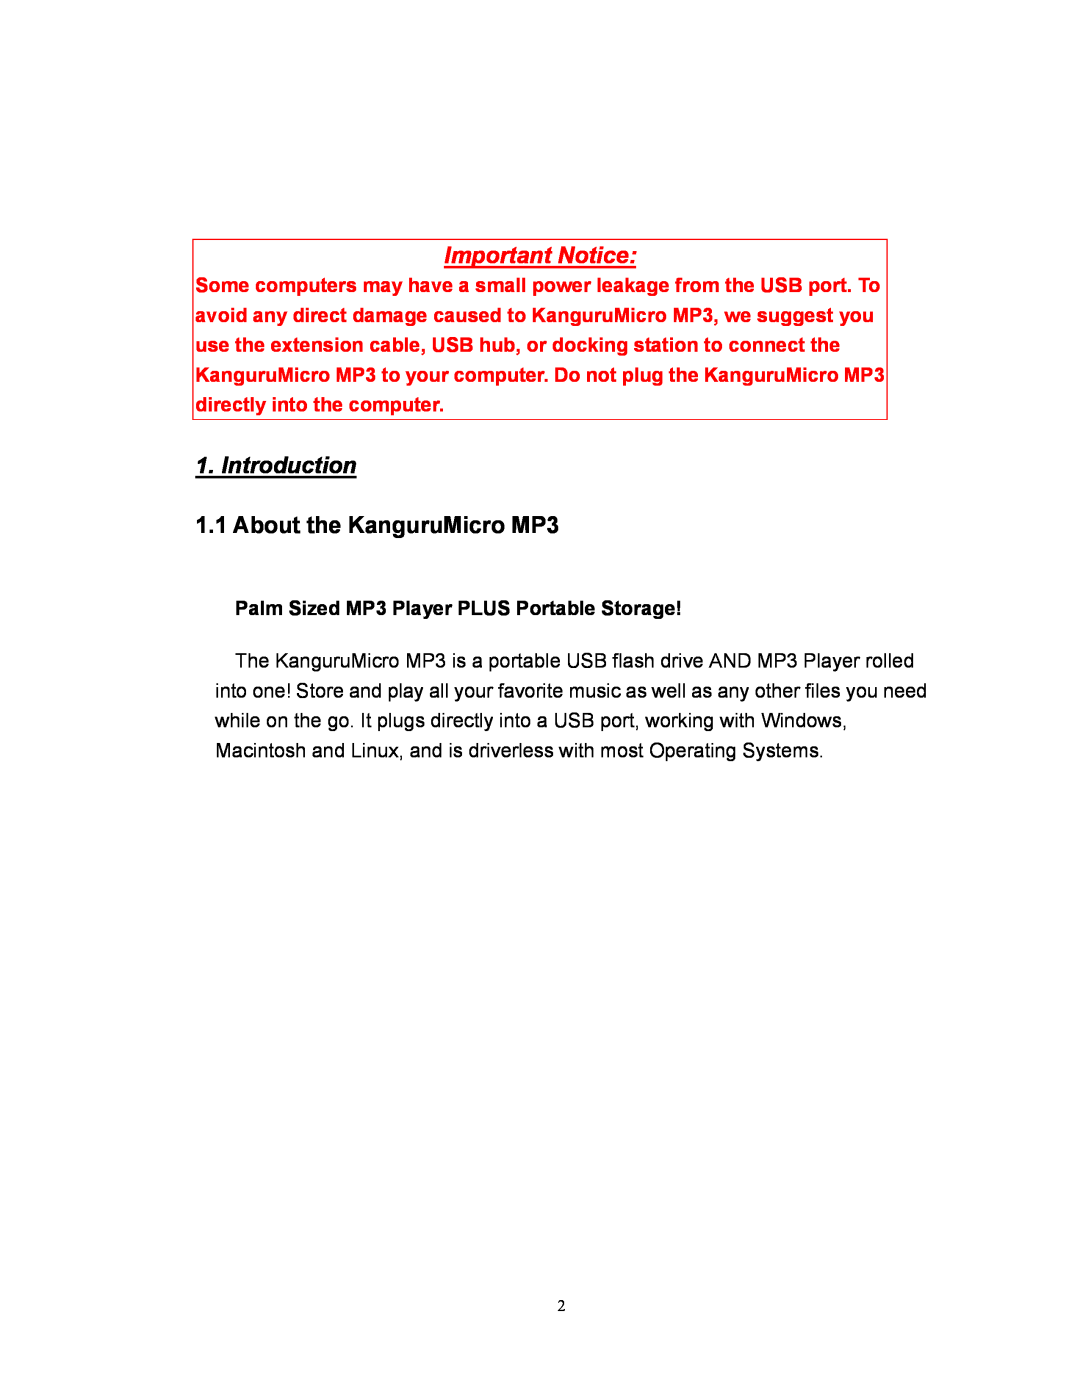 Kanguru Solutions mp3 player and usb flash drive user manual Introduction, About the KanguruMicro MP3, Important Notice 